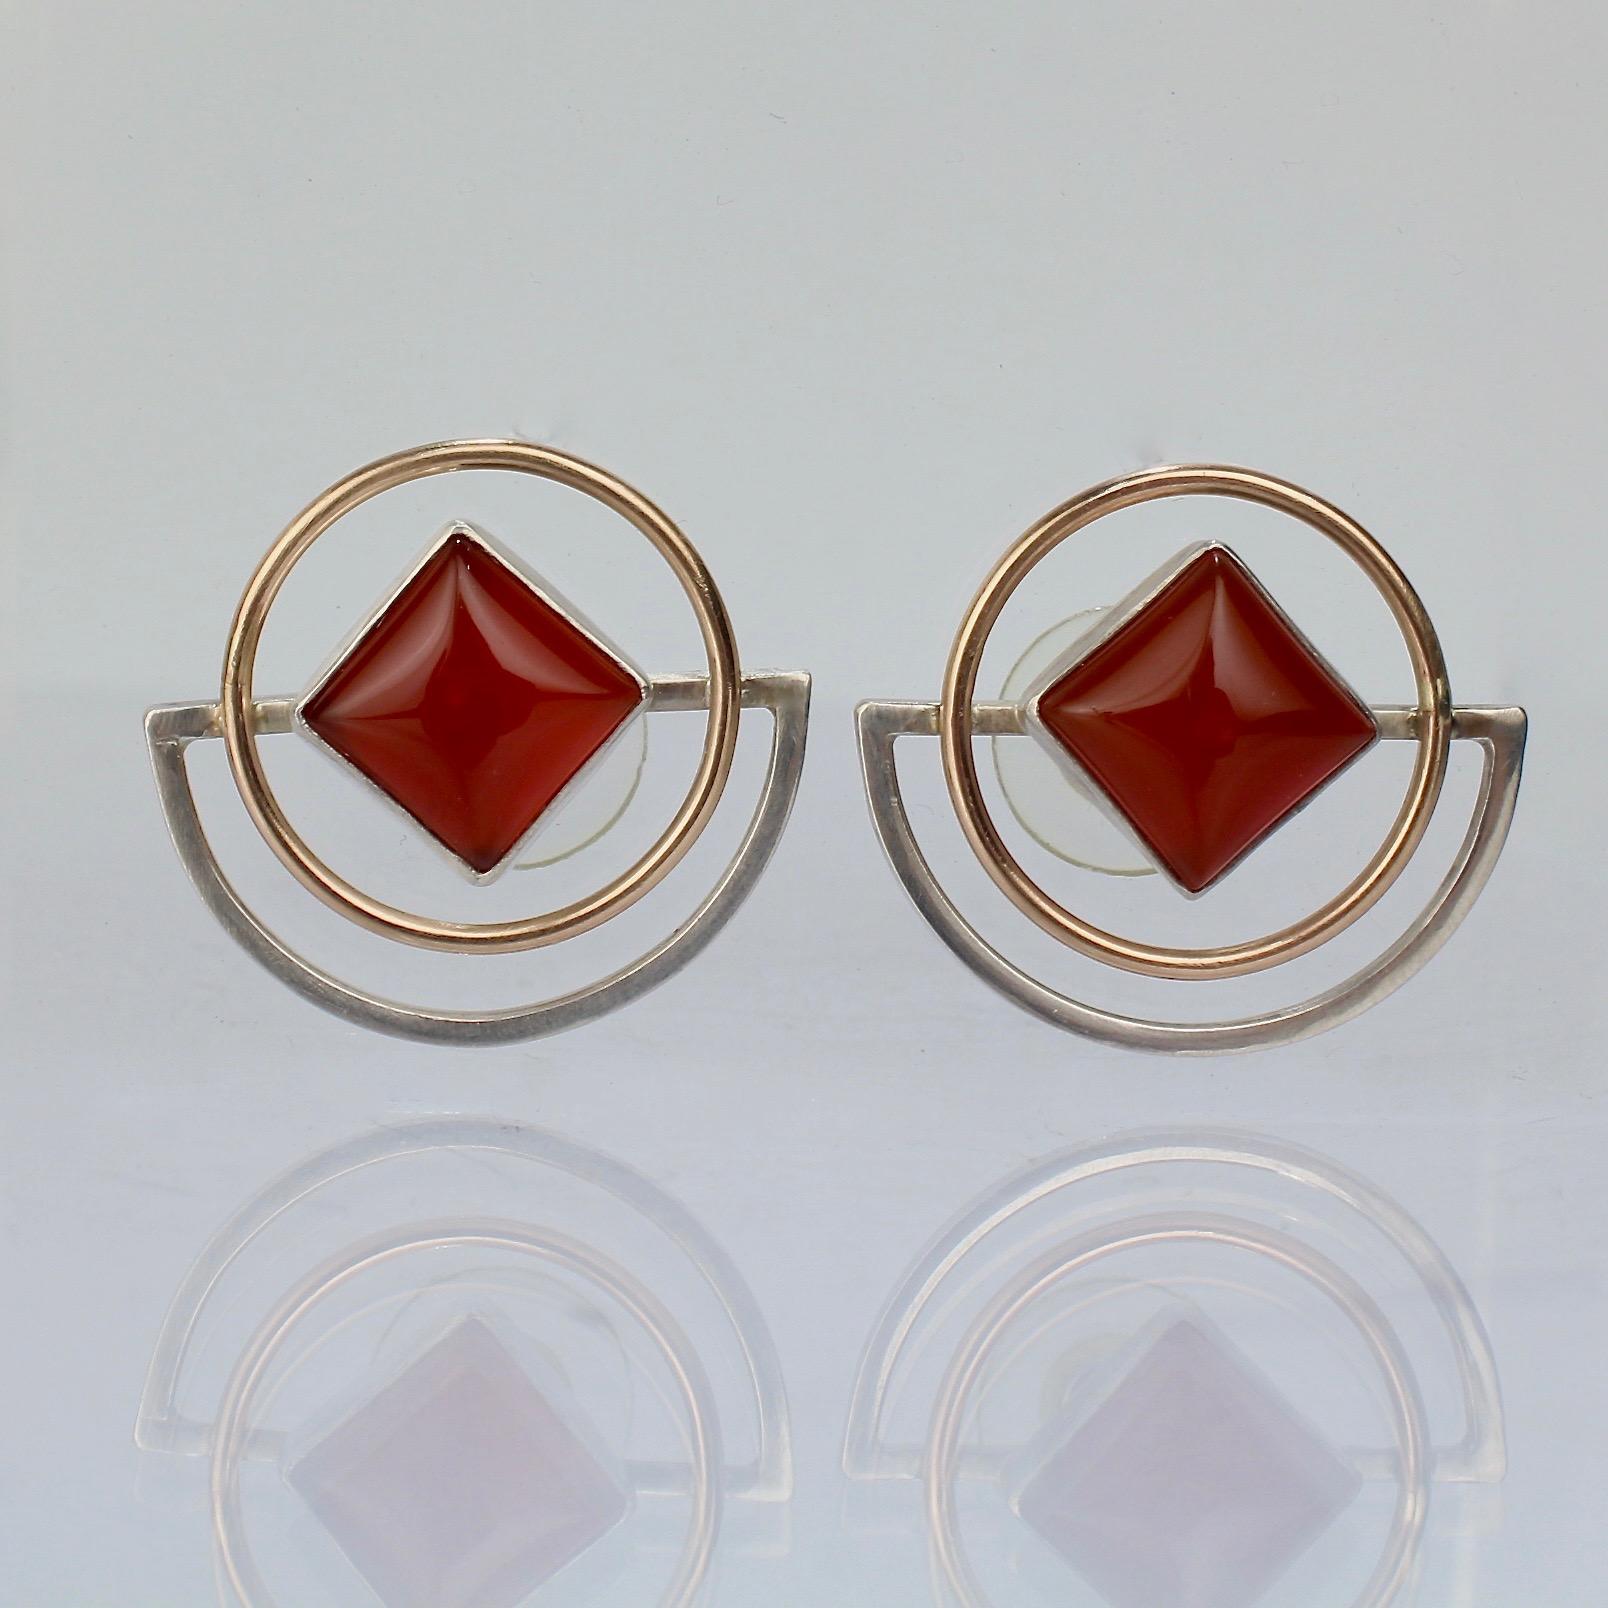 A fine pair of Yumi Ueno retro geometric gold, silver, & carnelian earrings.

Date:
20th Century

Overall Condition:
They are is in overall good, as-pictured, used estate condition with some very fine & light surface scratches and other signs of